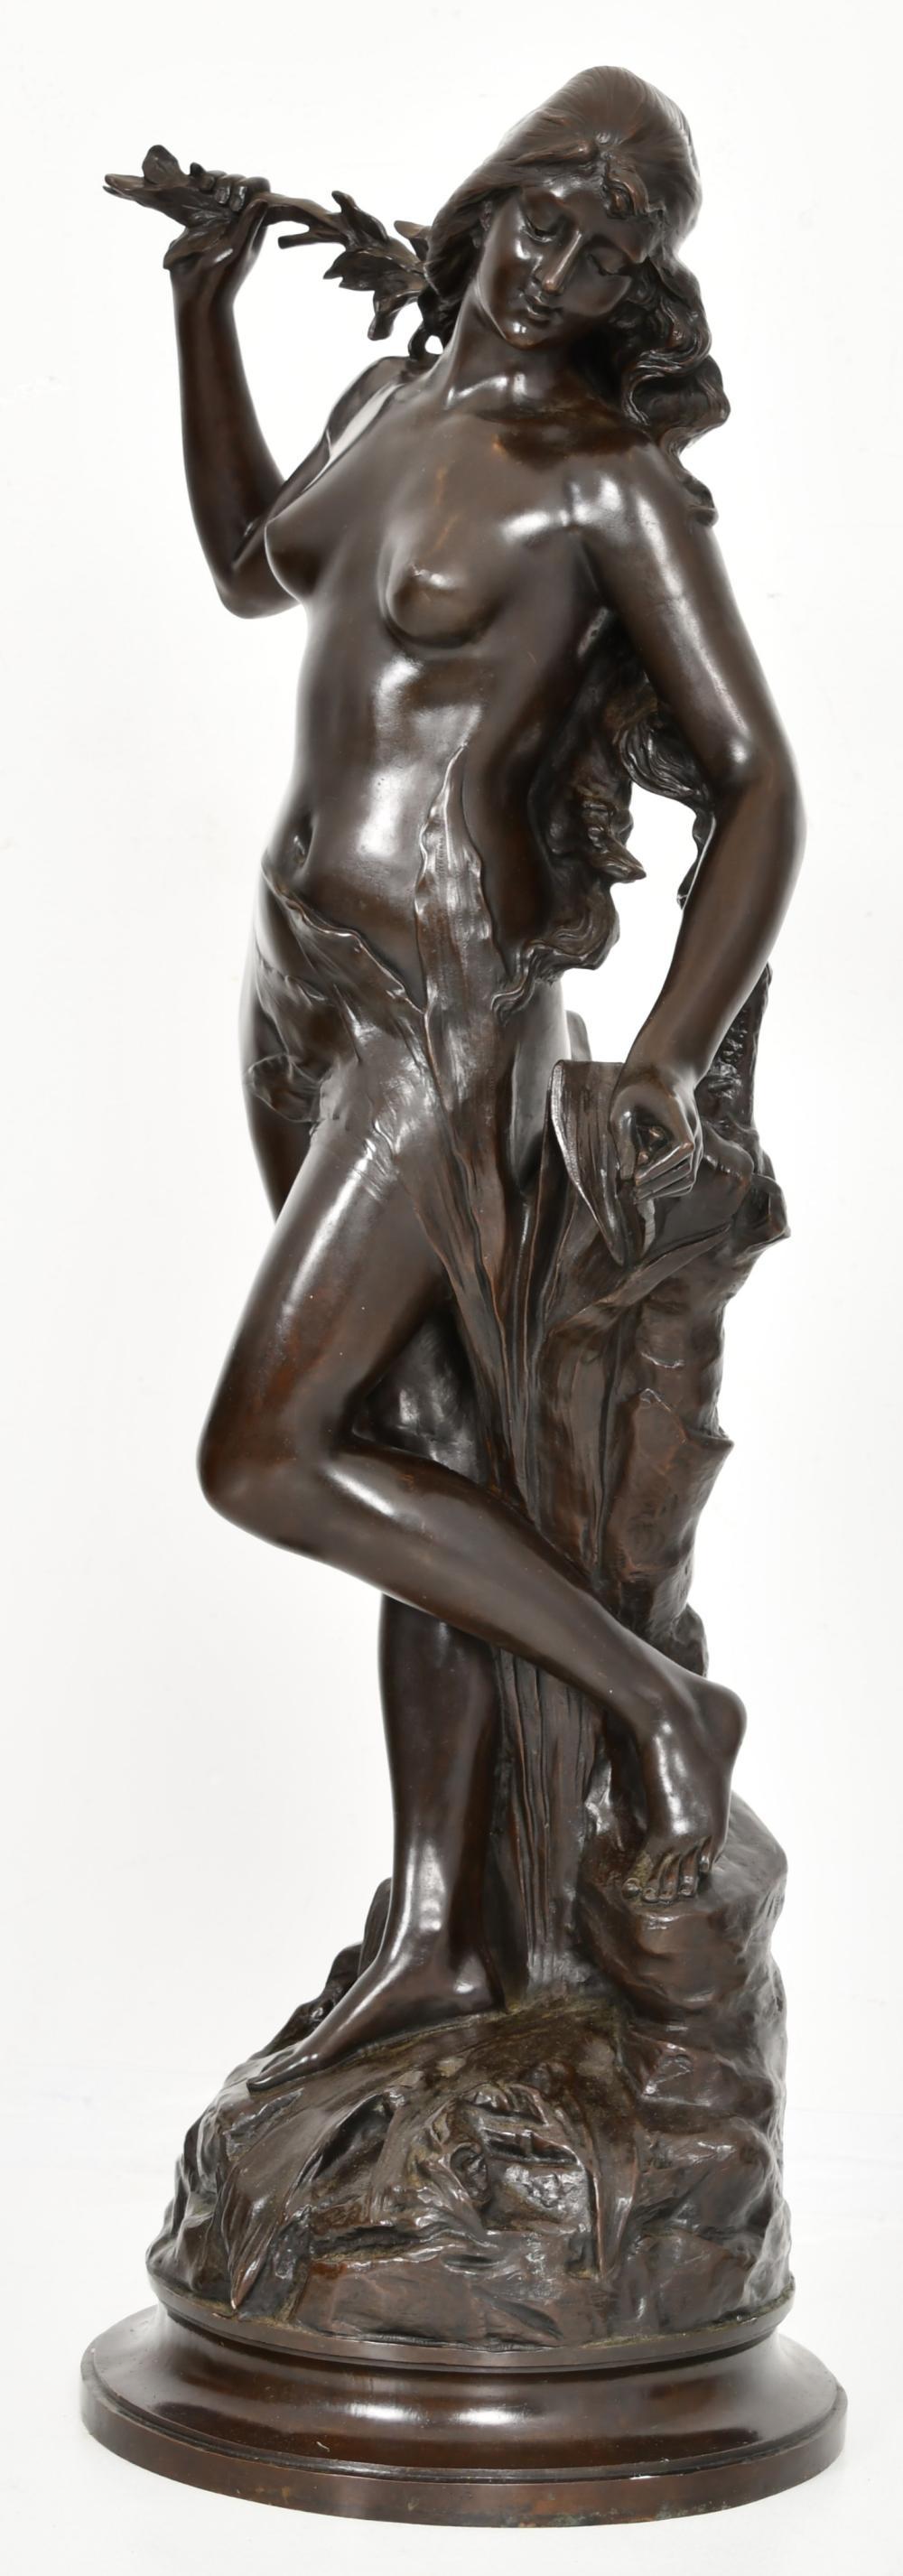 A French 19 century very finley cast bronze figure of a semi nude maiden Signed Edouard Drouot (1859-1945).